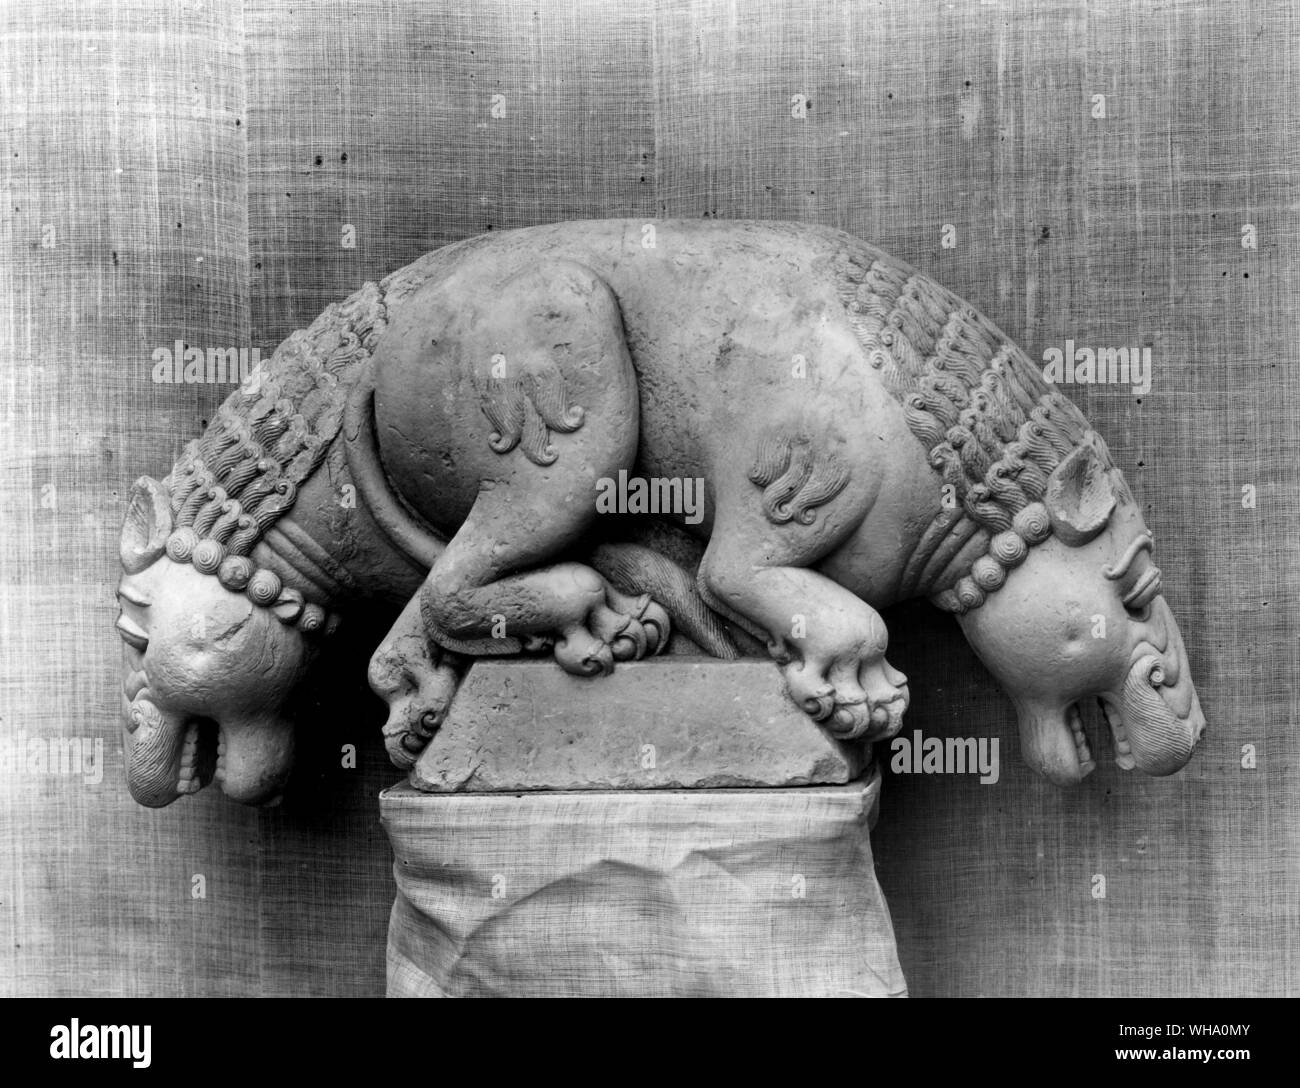 Double lion capital in sandstone from Gwalior fort. 6-7th Century AD. From an exhibition of Indian Art, Asia. Stock Photo